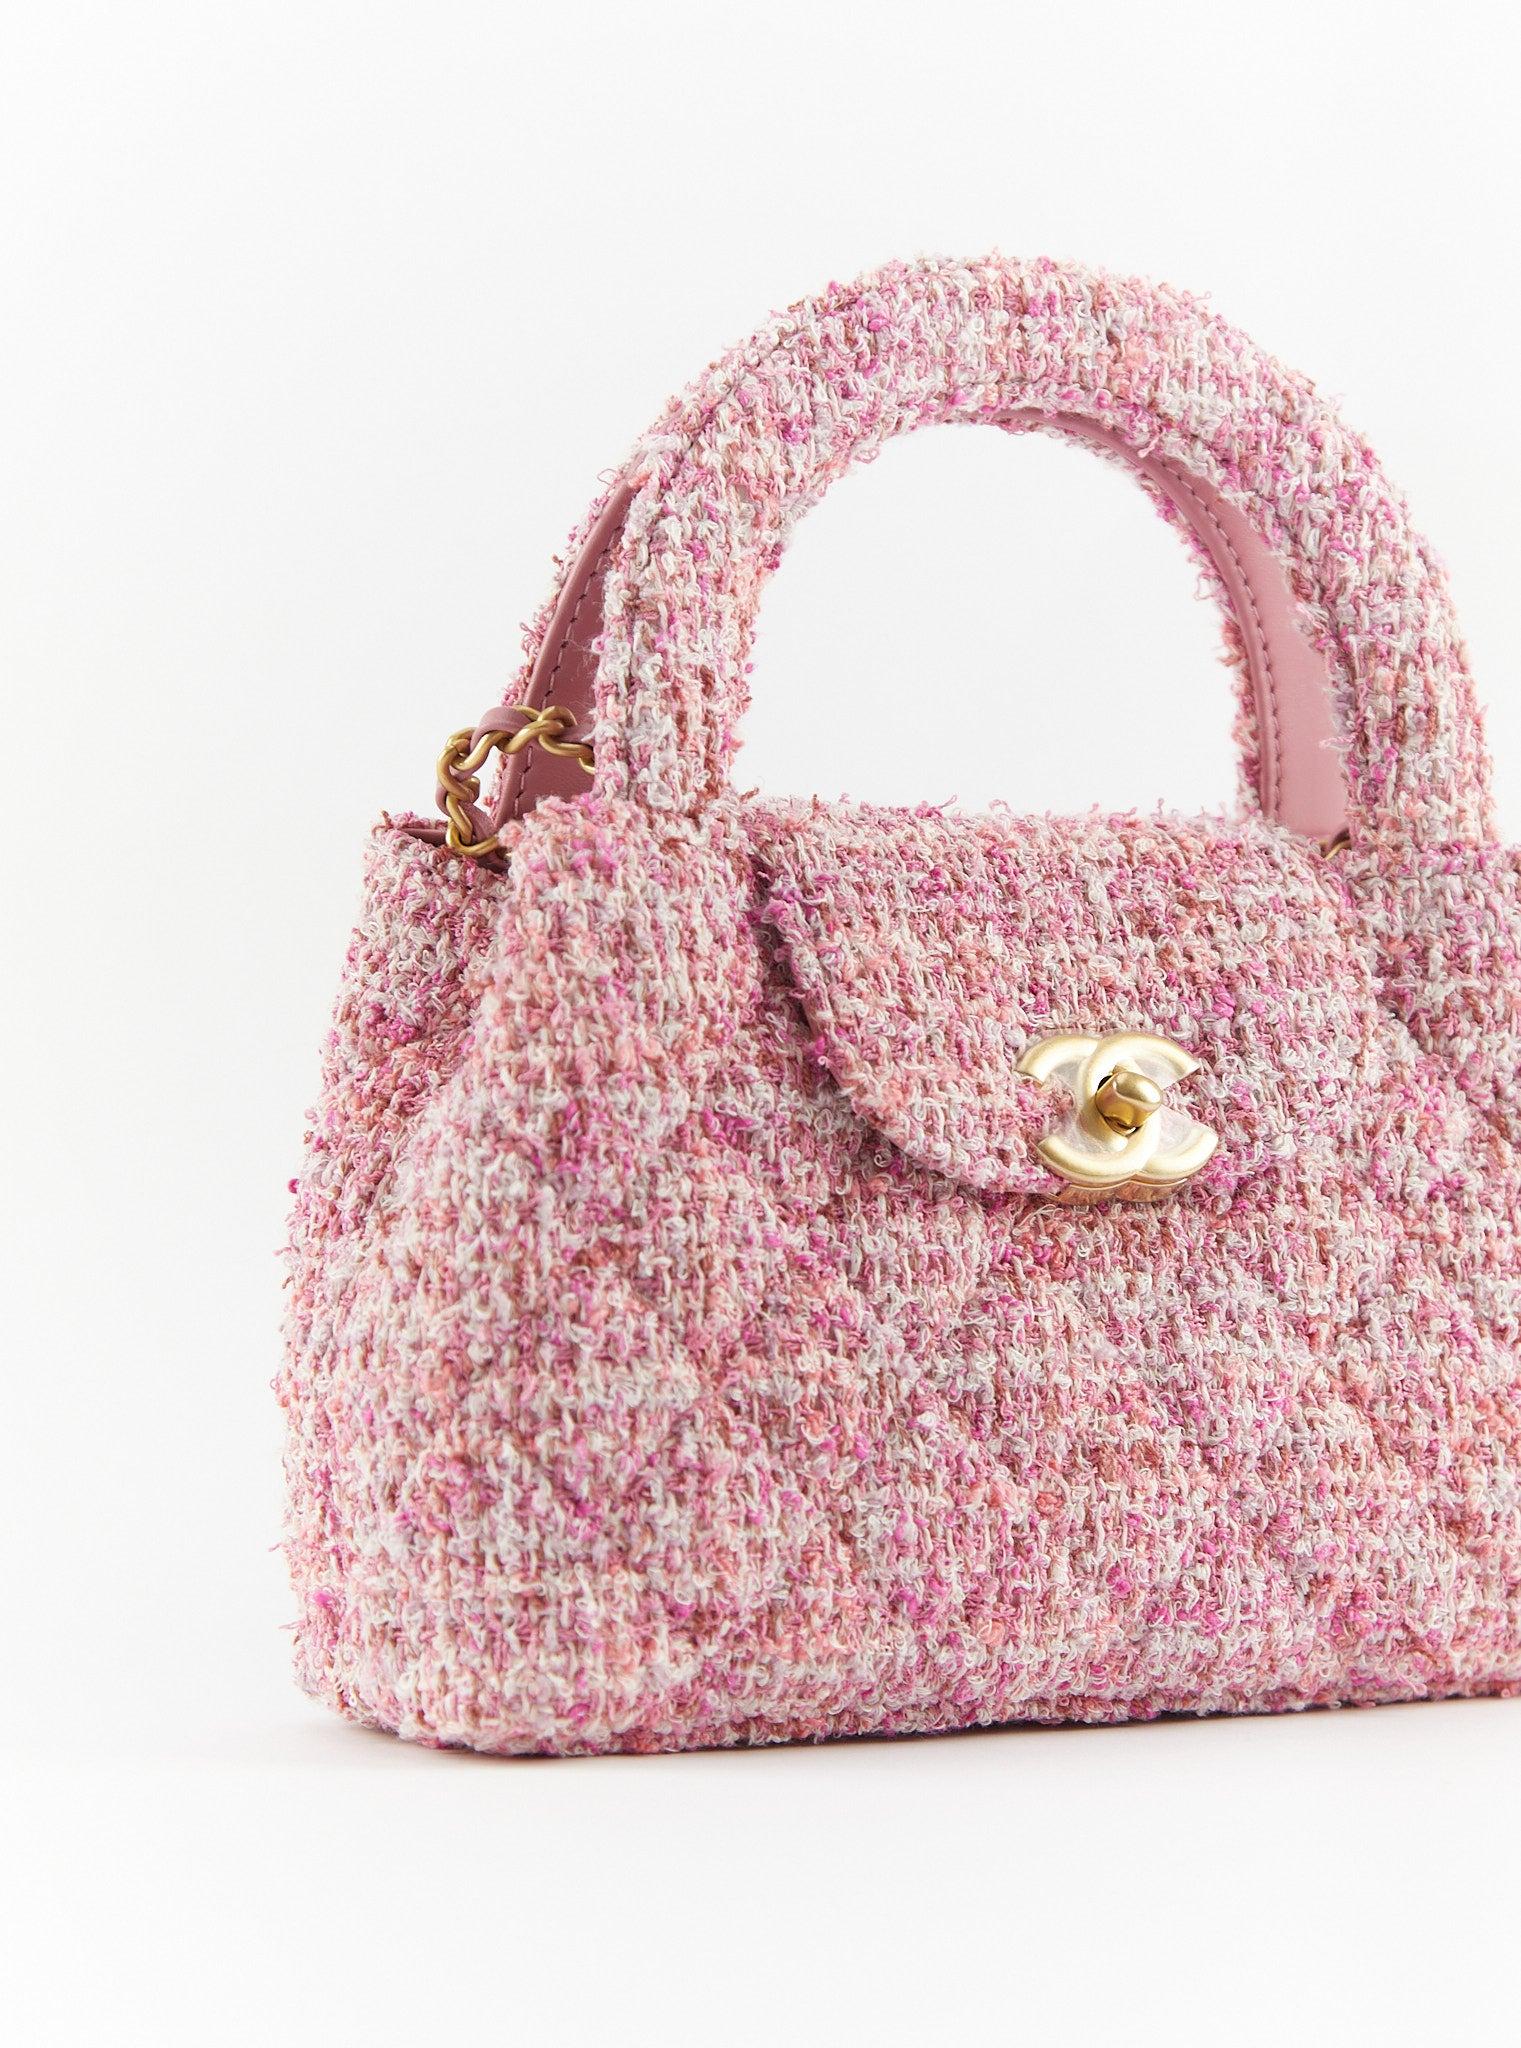 Chanel Small Kelly Bag in Pink and Ecru

Tweed with Gold-Tone Hardware

Accompanied by: Chanel Box, Dustbag & Authenticity Chip

Dimensions: H 17 x W 25 x D 8cm